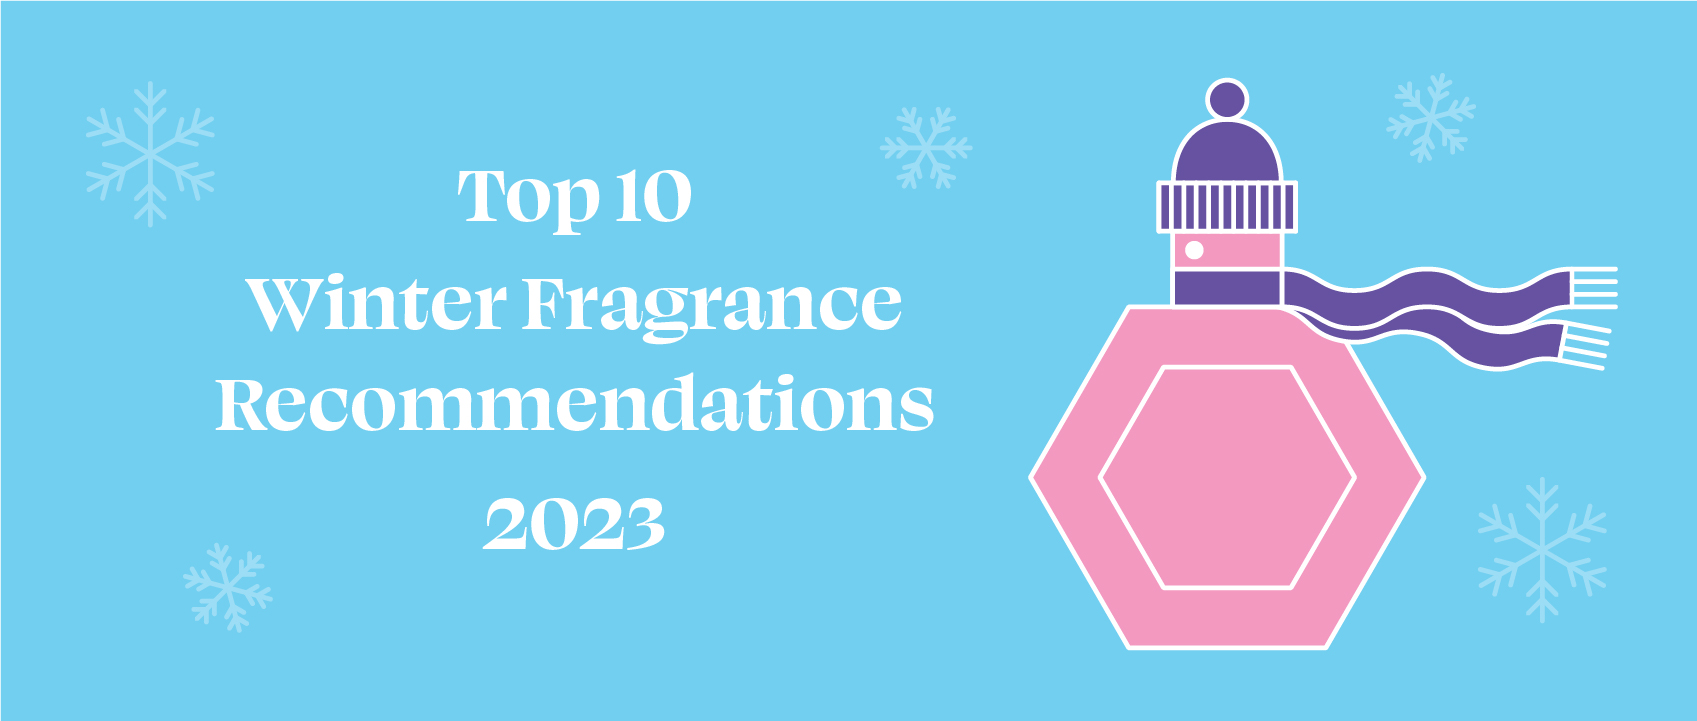 top 10 winter fragrance recommendations with a perfume bottle wearing a beanie and a scarf and snowflakes